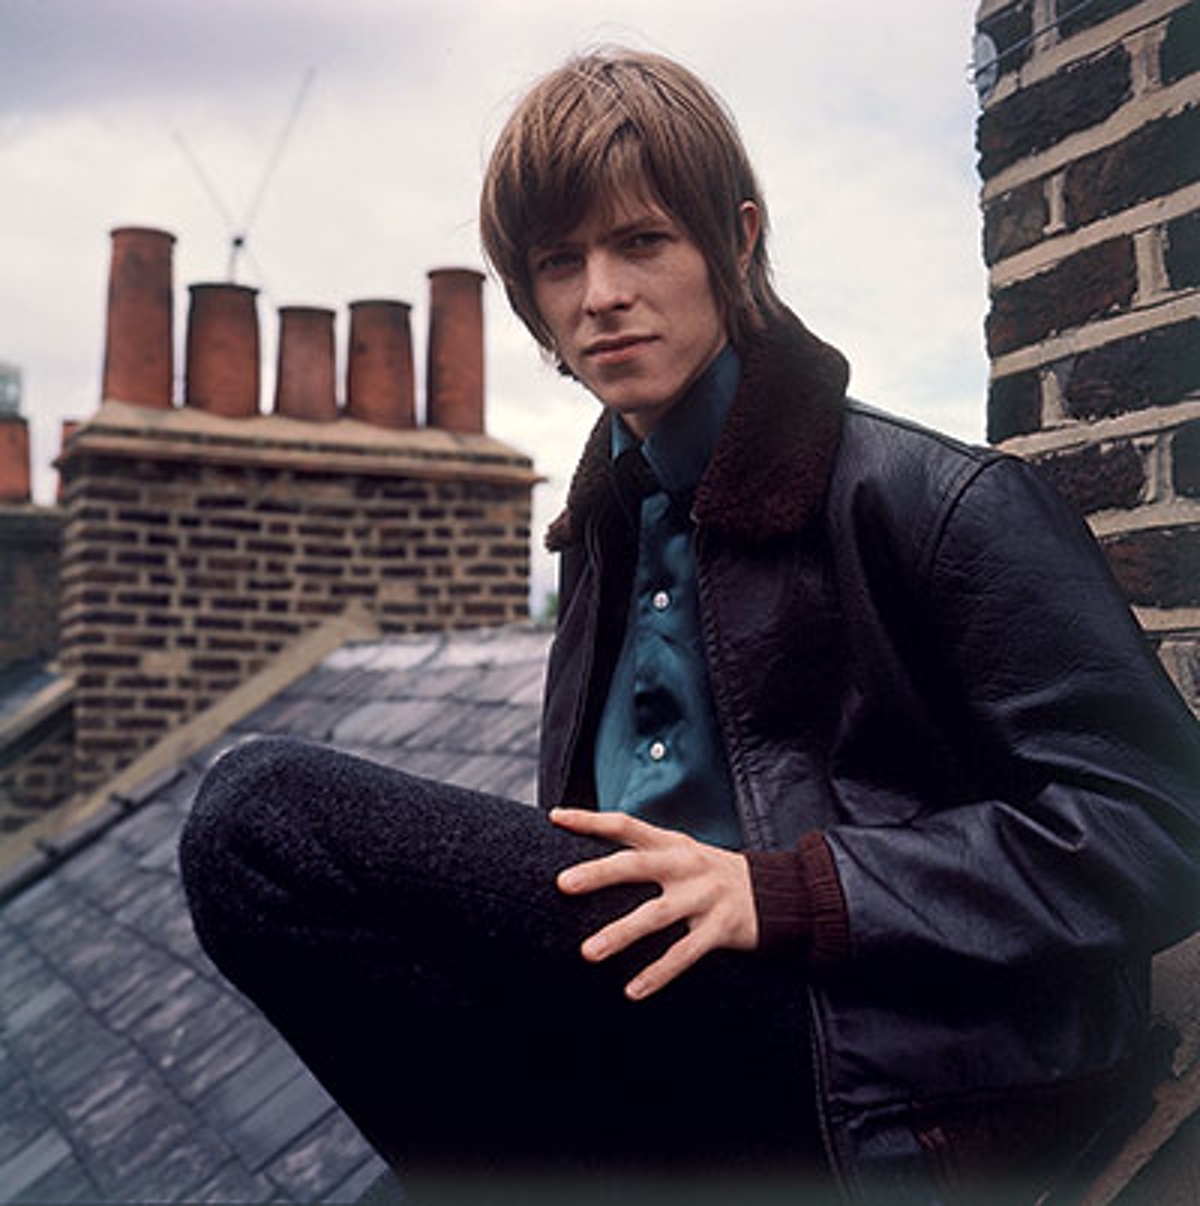 David-Bowie-is-photograph-006